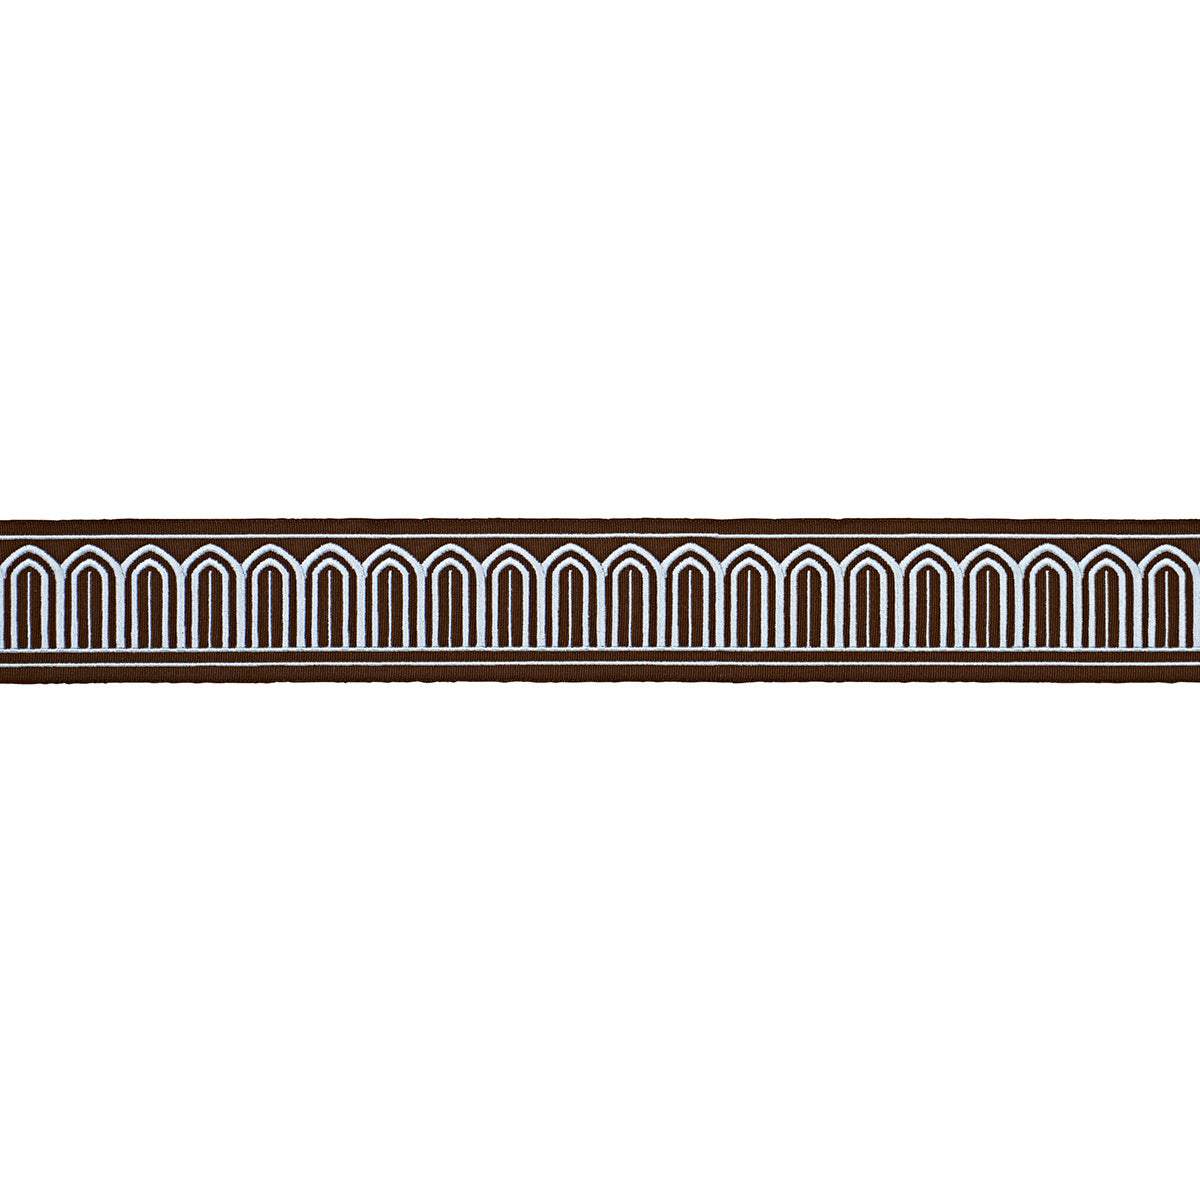 ARCHES EMBROIDERED TAPE MEDIUM | SKY ON BROWN